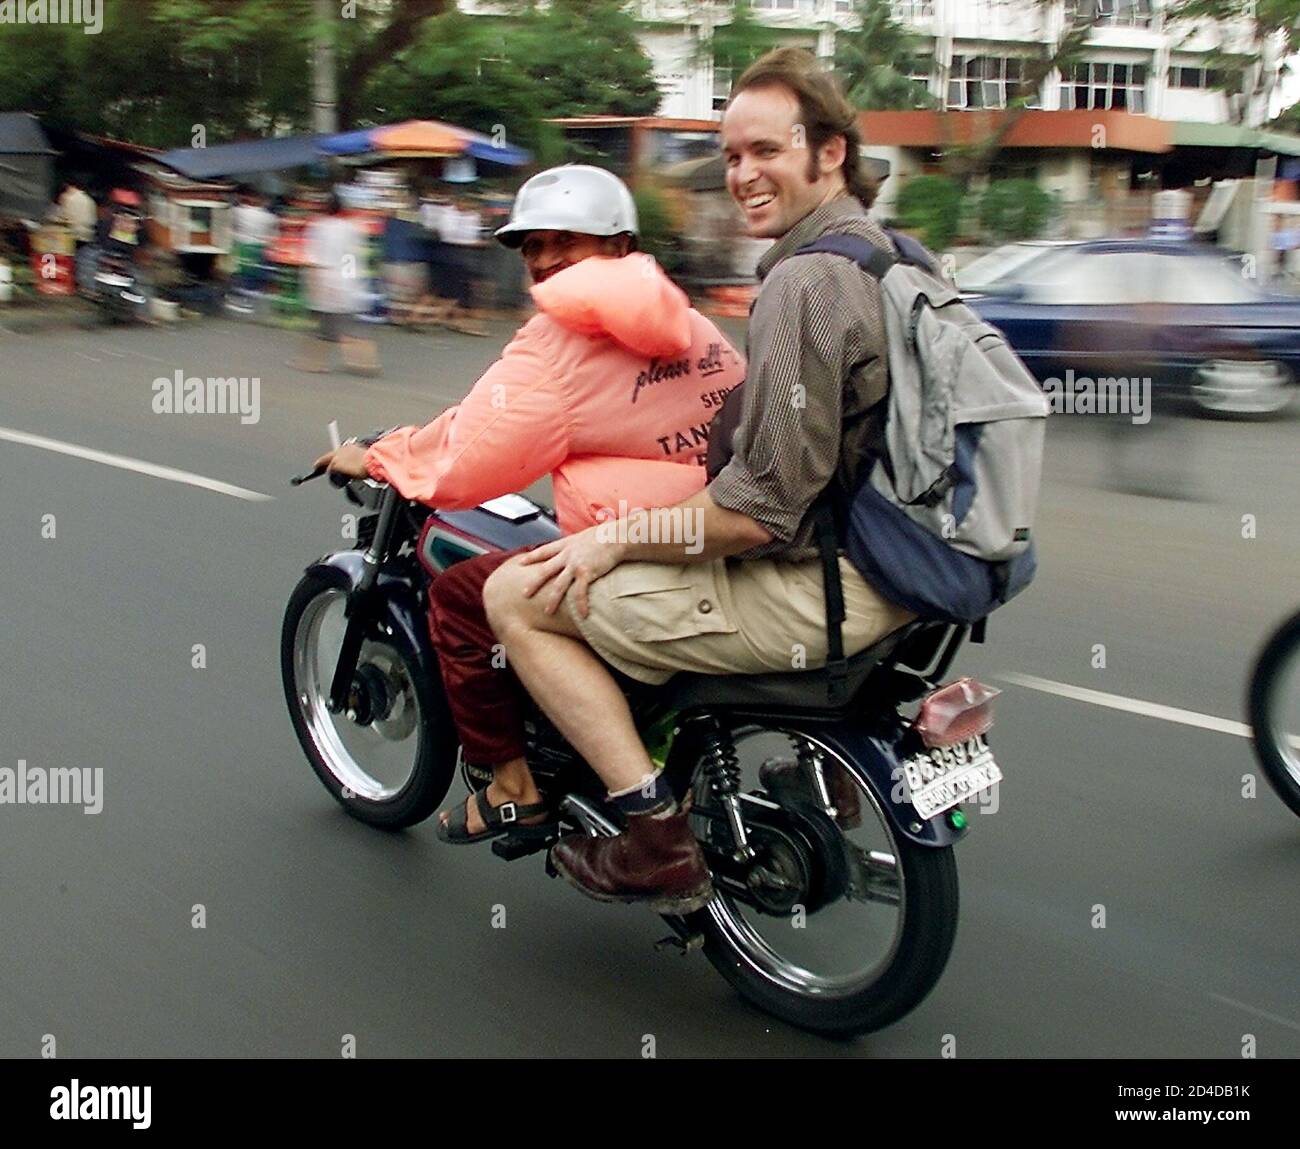 Reuters cameraman Harry Burton from Australia is seen riding on the back of  a motorcycle in Jakarta. Four journalists, including Burton and Reuters  photographer Azizullah Haidari, were killed when gunmen ambushed their